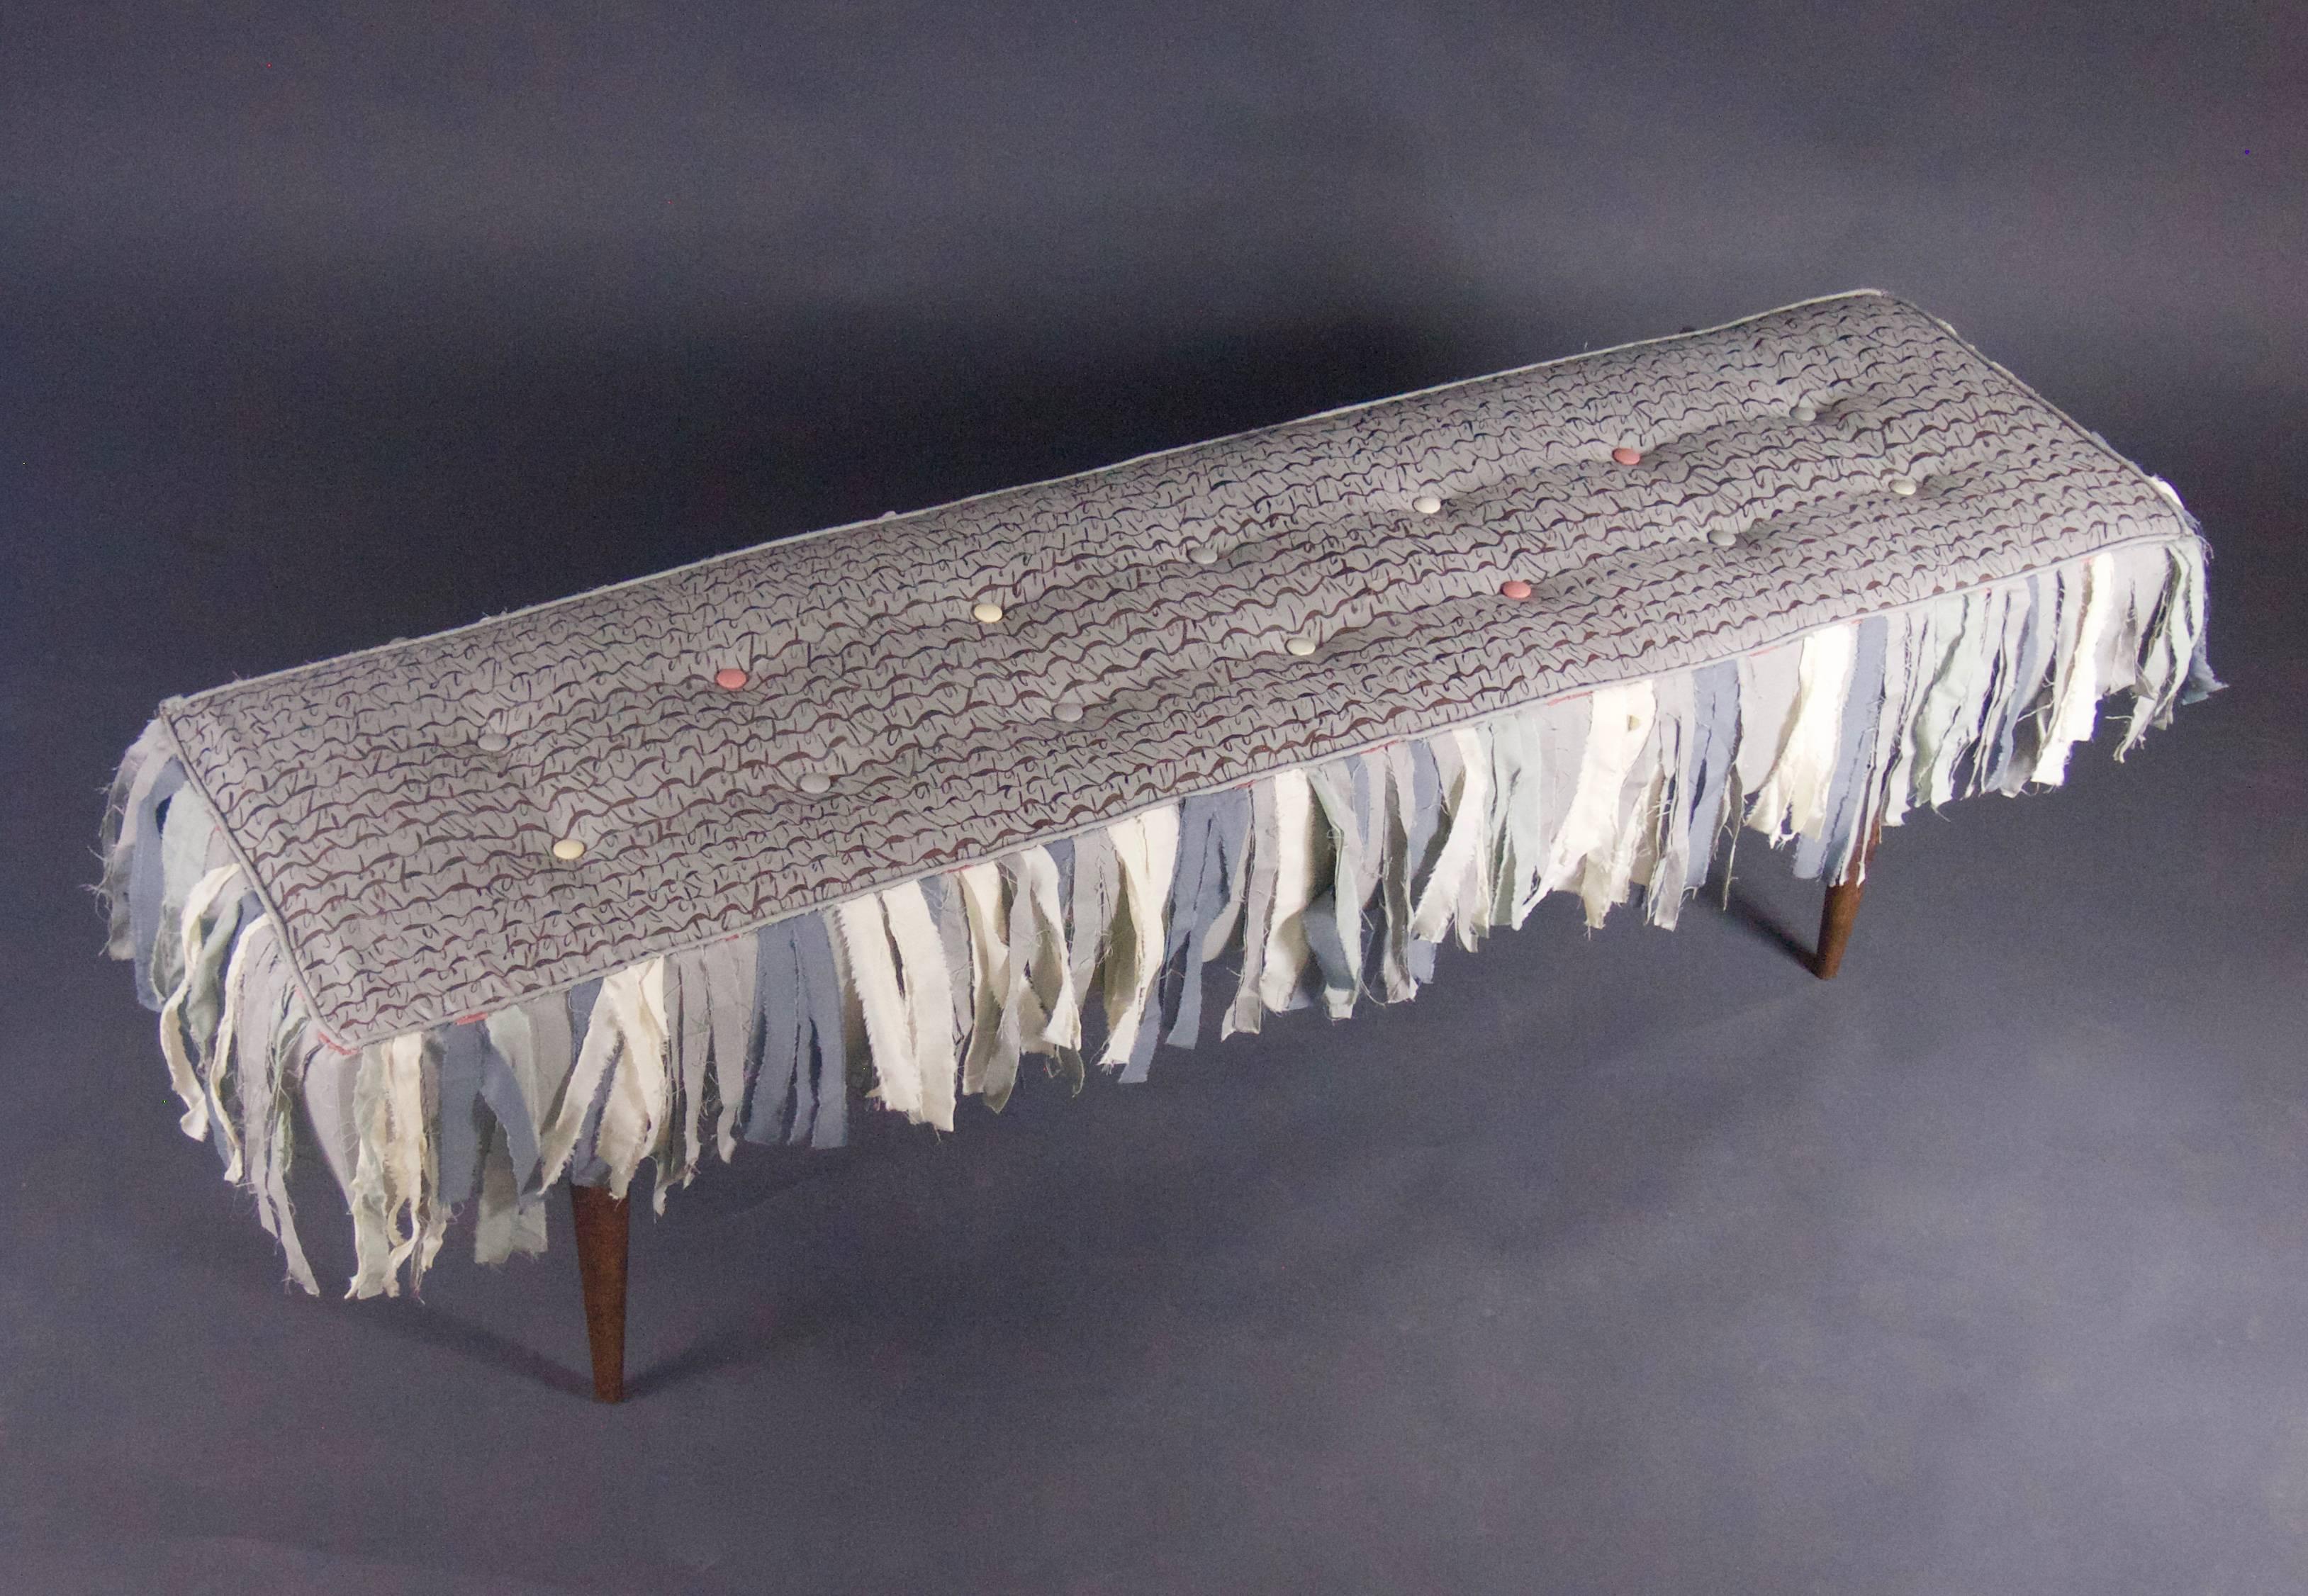 Handmade Bench with Hand-Painted Textile and Handmade Cotton Fringe 1